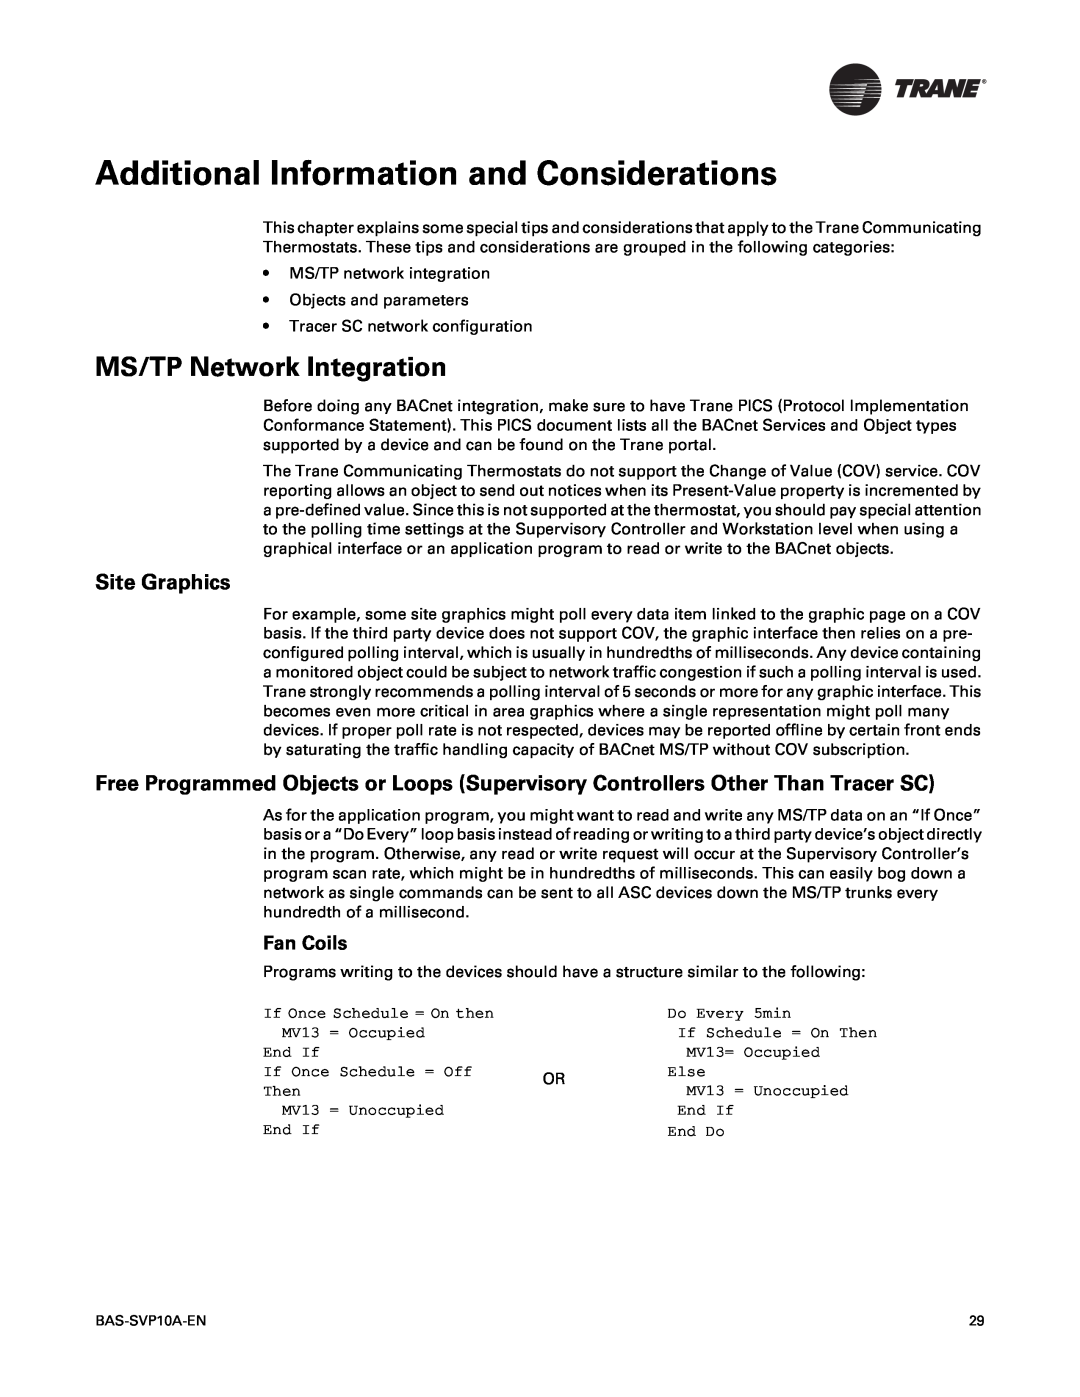 Trane Trane Communicating Thermostats (BACnet) manual Additional Information and Considerations, MS/TP Network Integration 